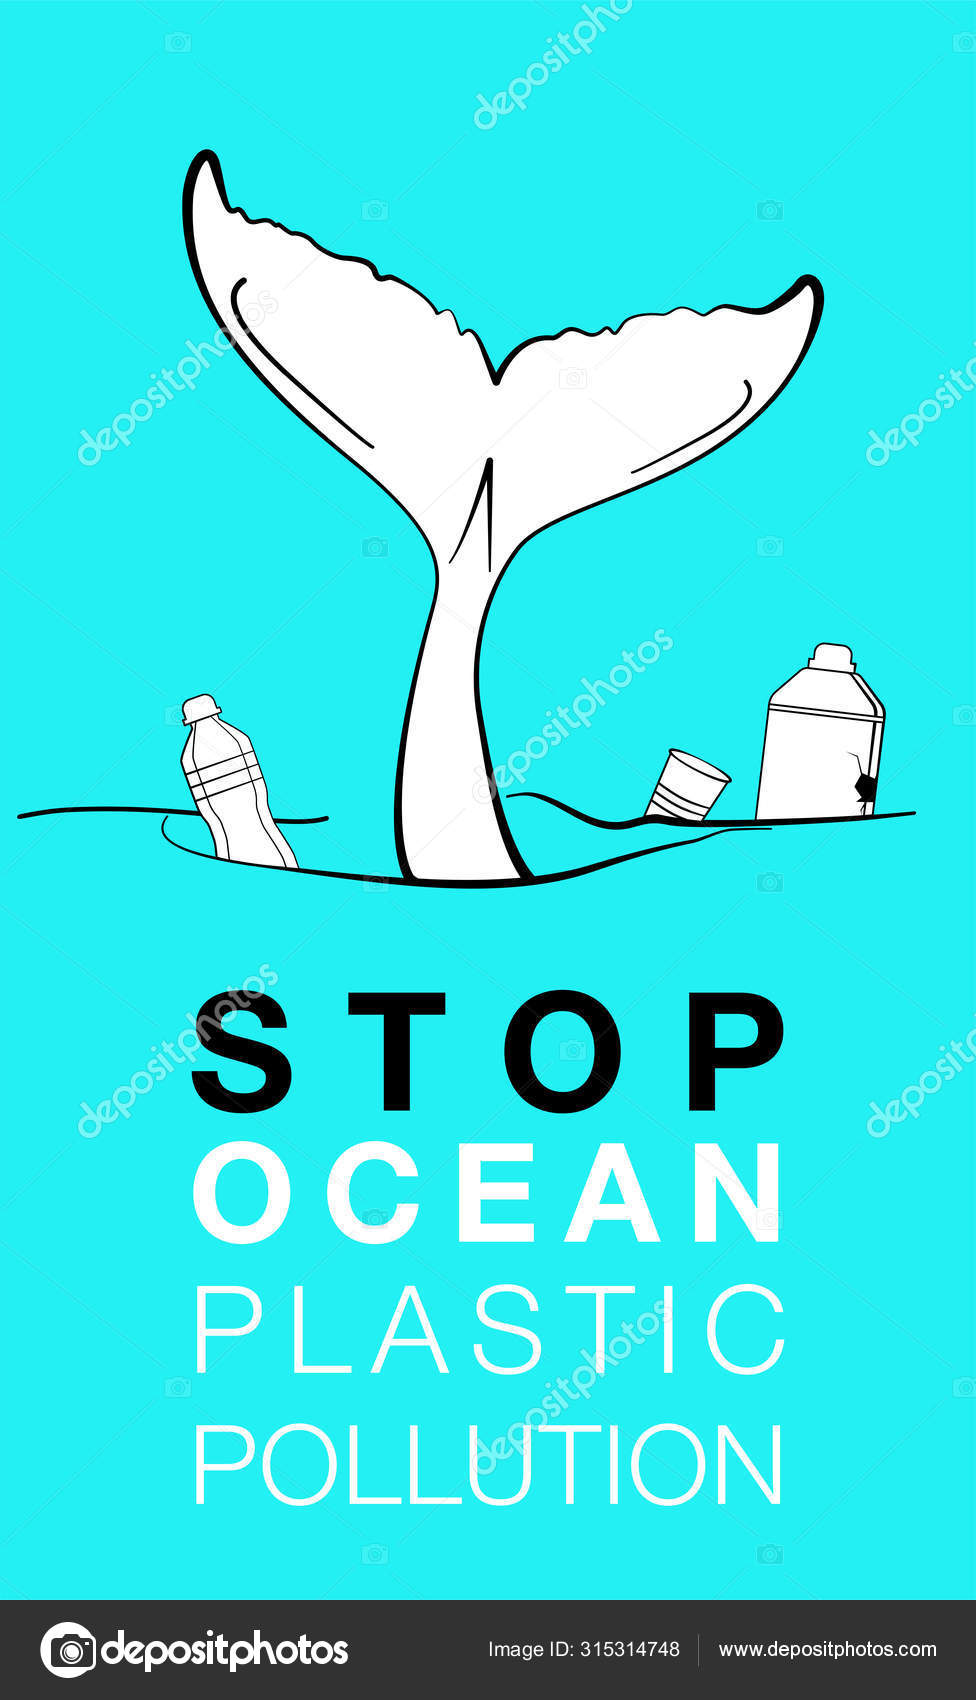 Plastic pollution poster